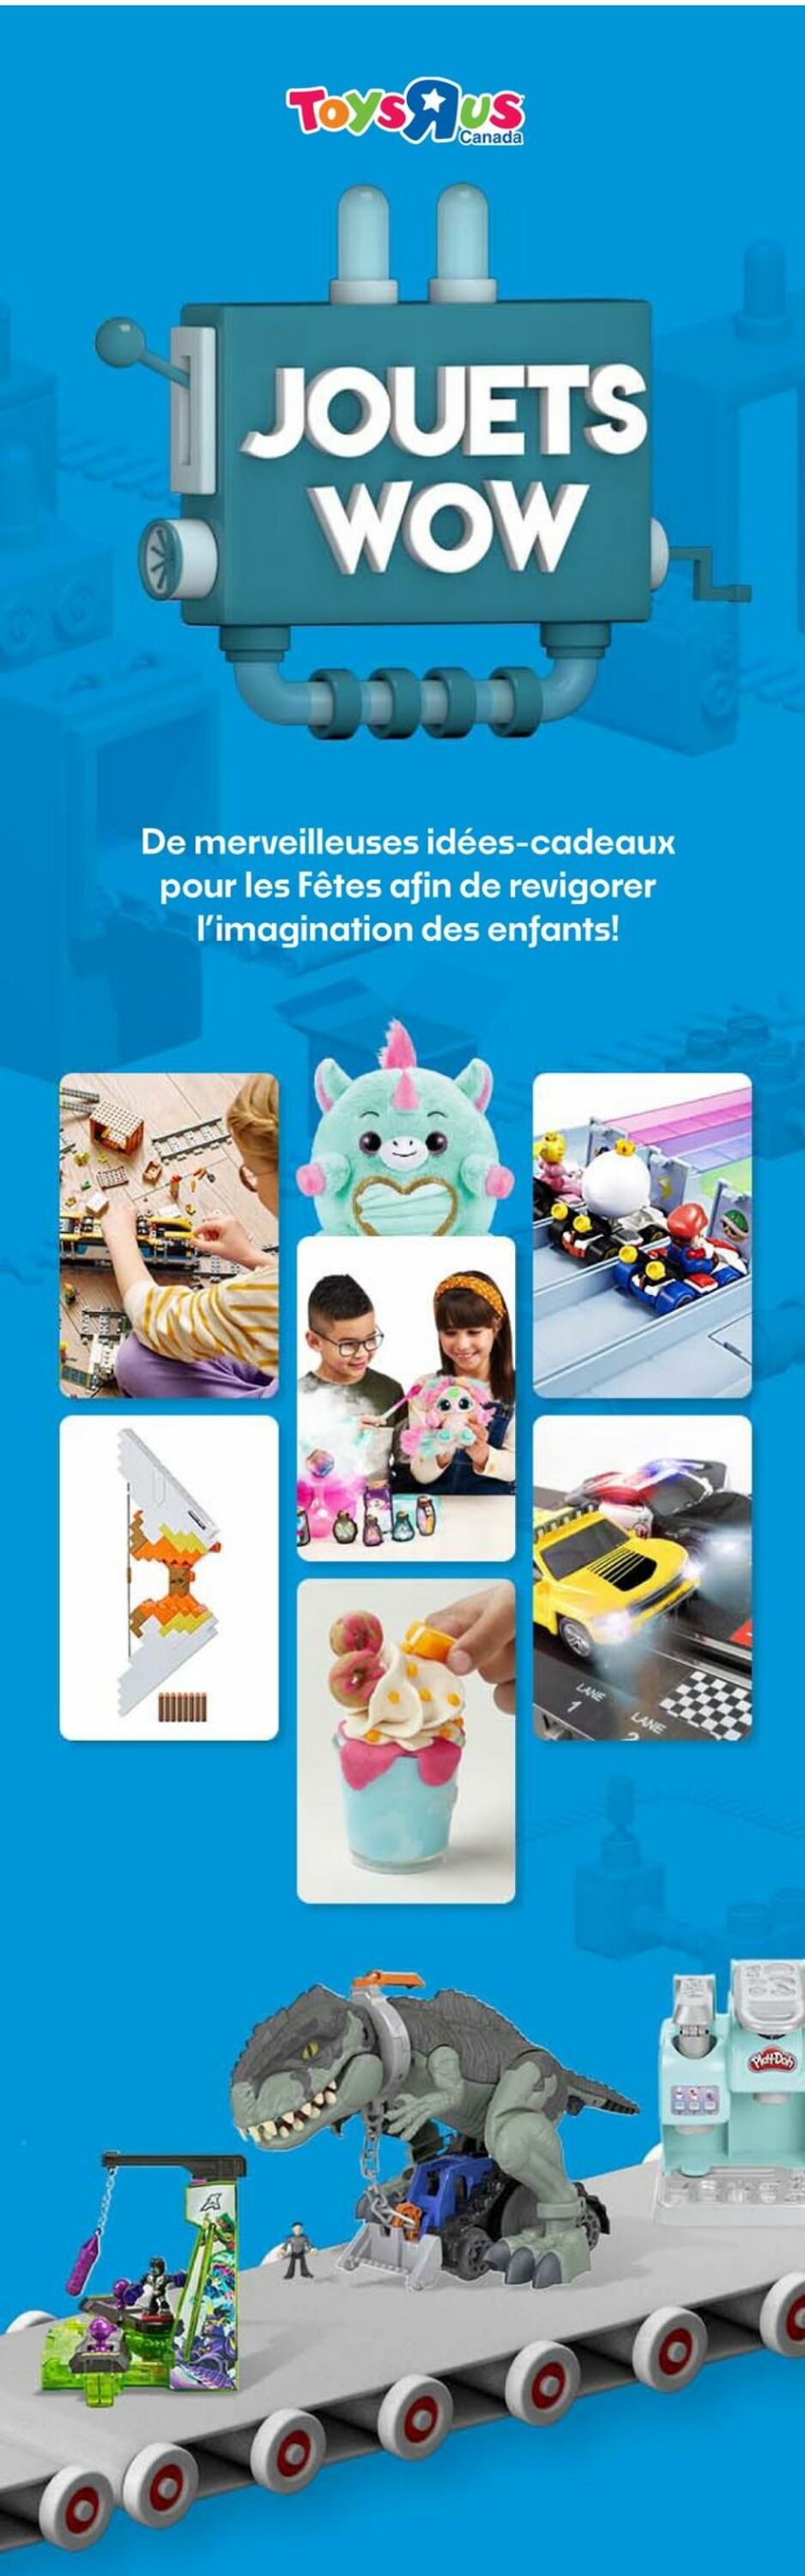 Circulaire Toys’R’Us 08.12.2022-14.12.2022